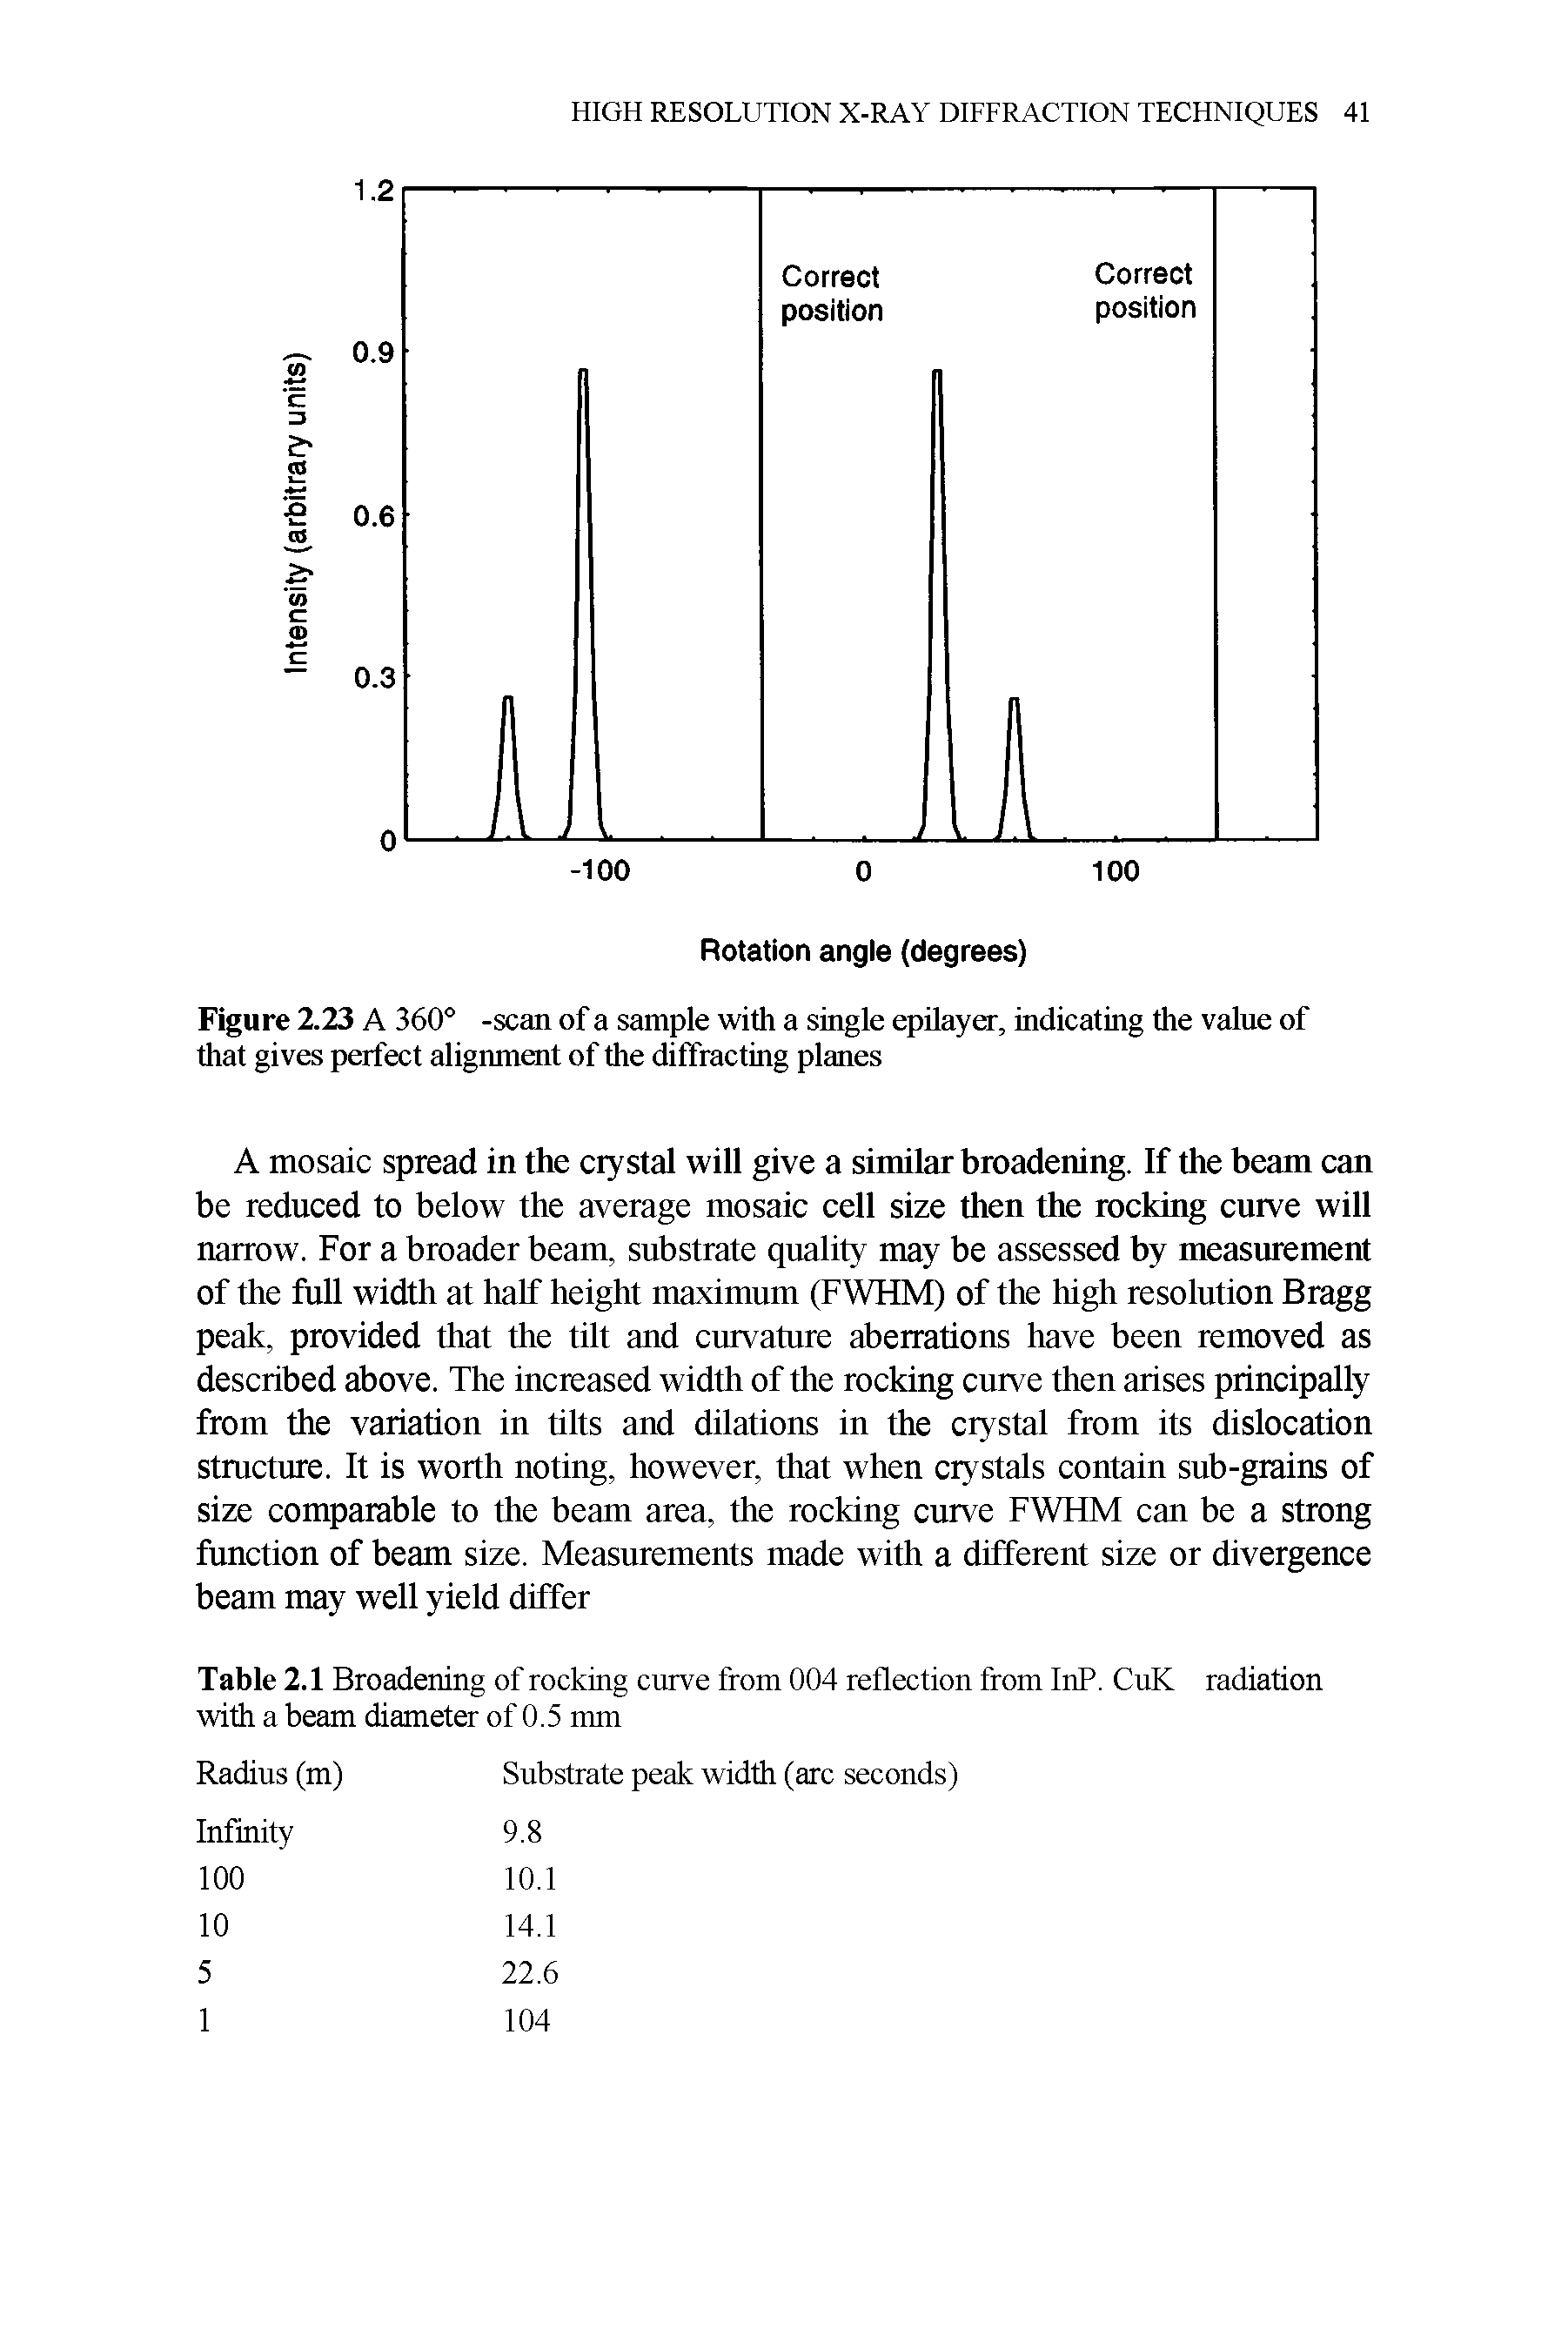 Figure 2.23 A 360° -scan of a sample with a single epilayer, indicating the value of that gives perfect alignment of the diffracting planes...